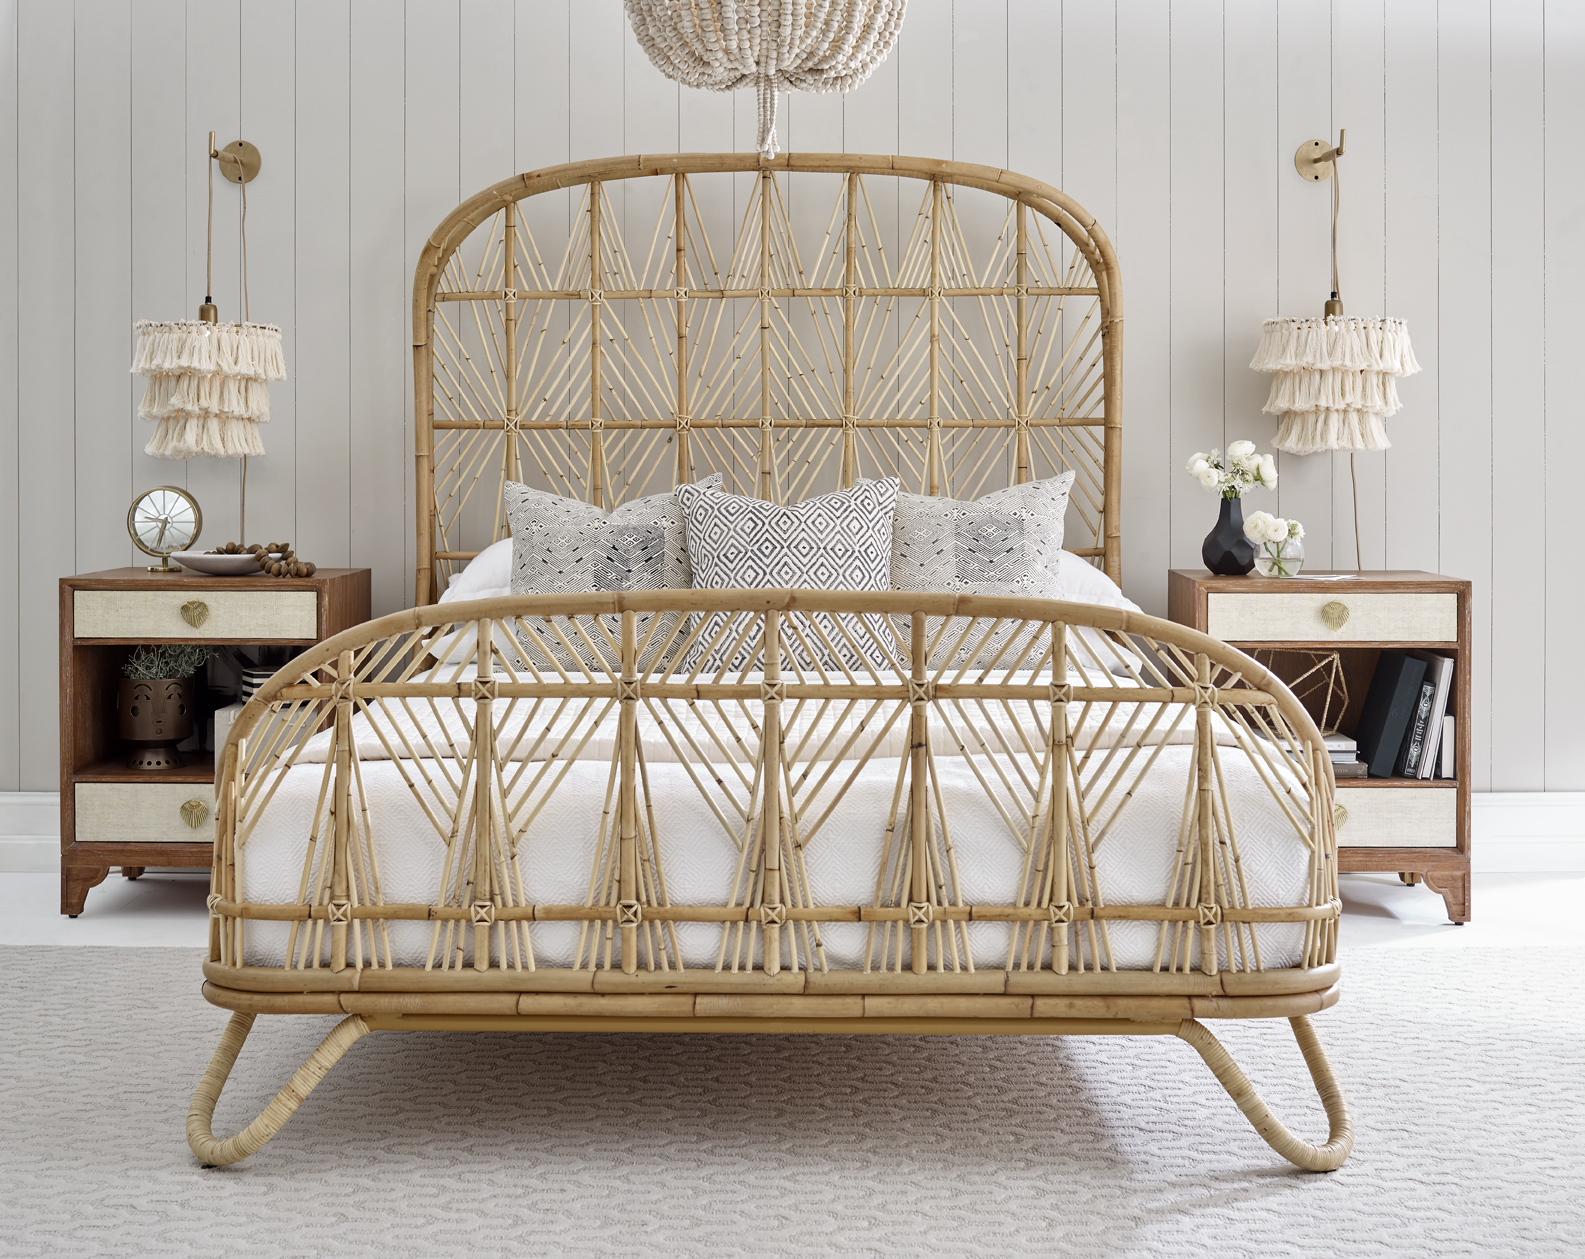 The Ara Bed features woven rattan detailing and a natural finish.